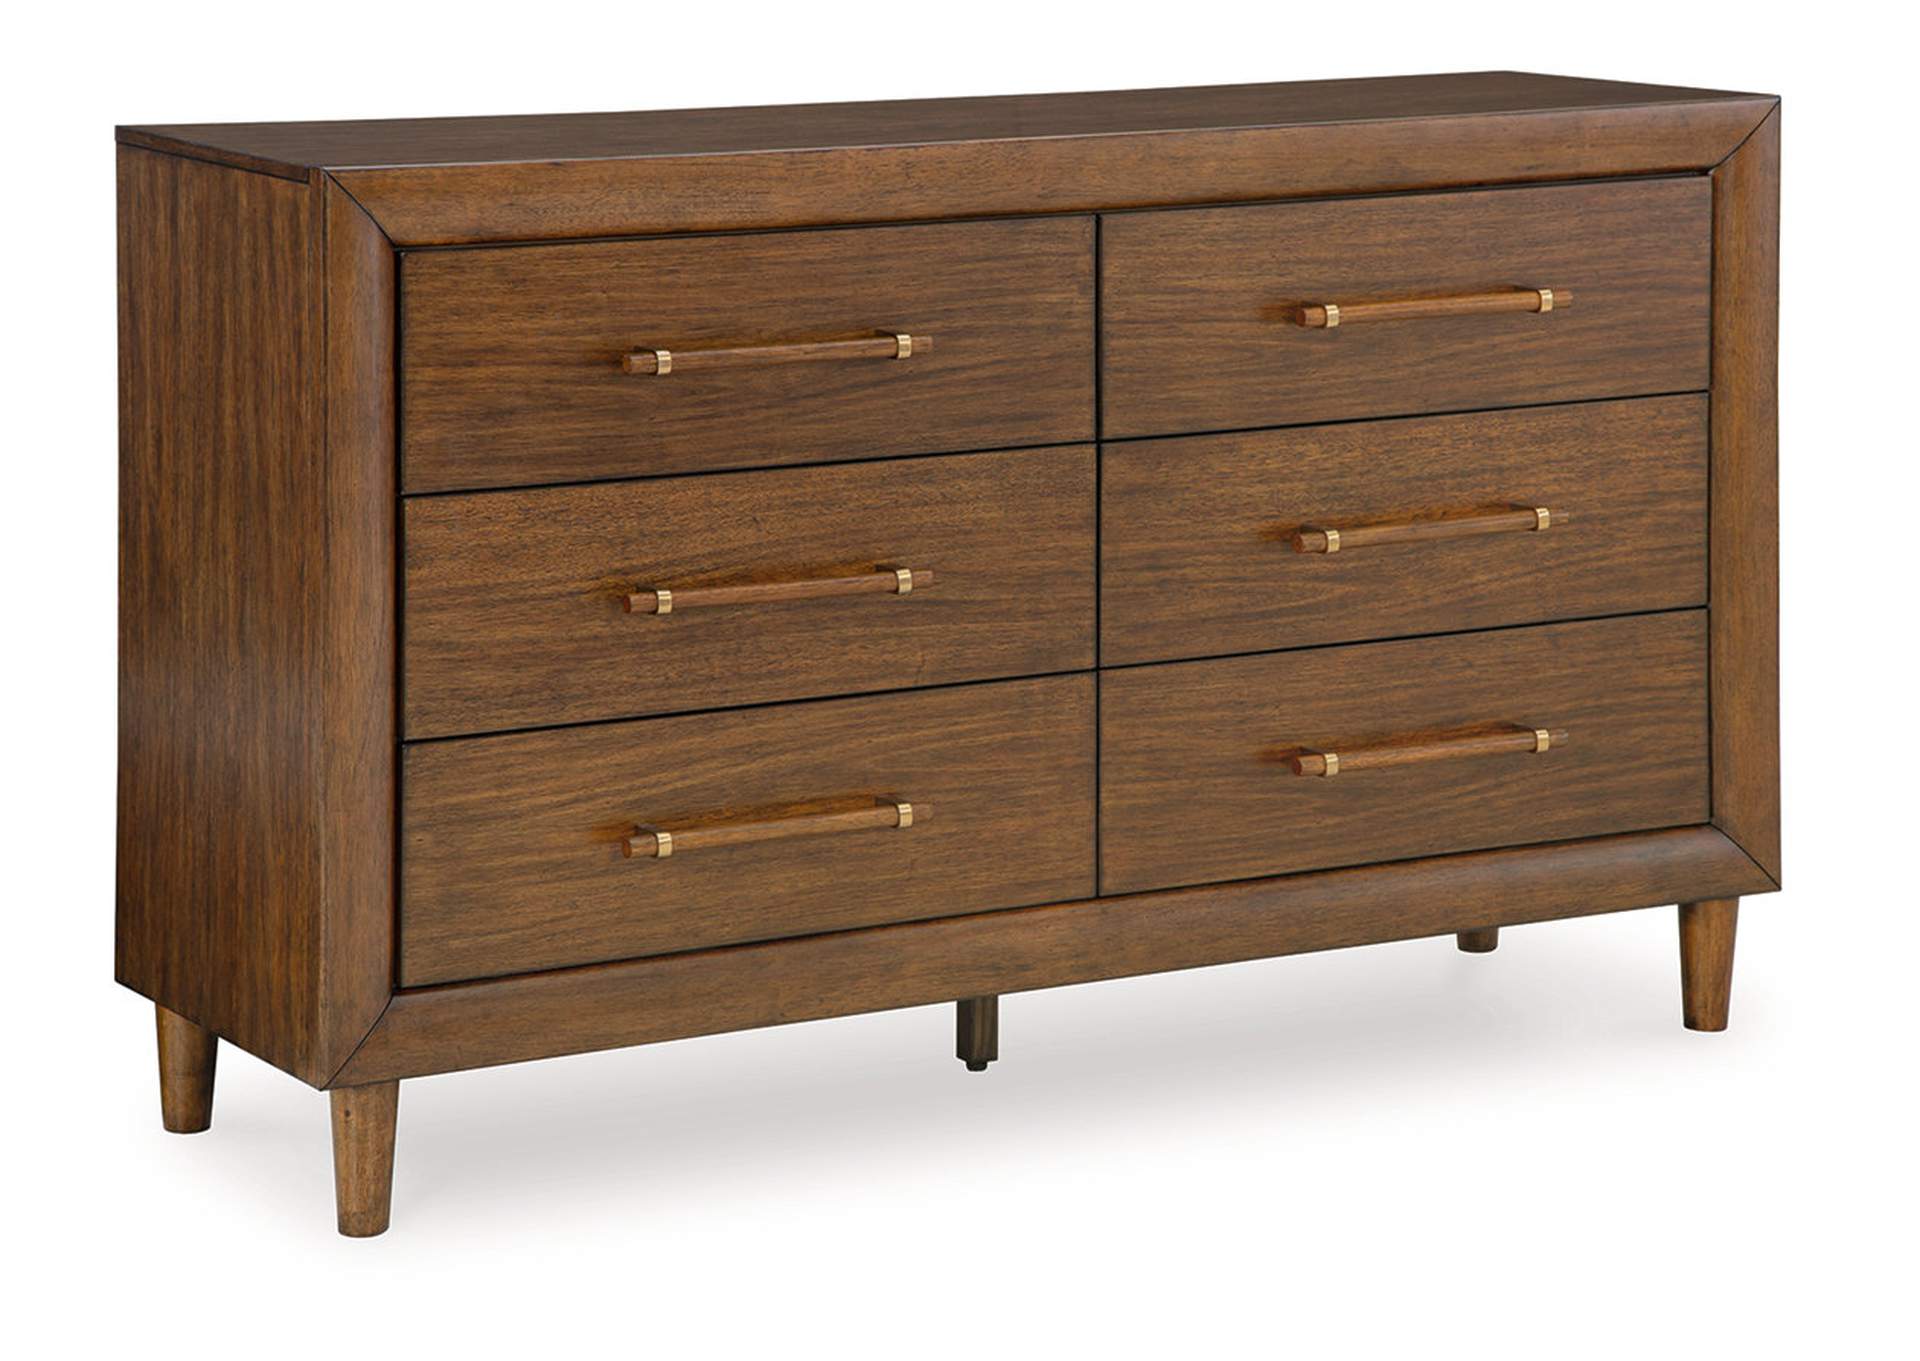 Lyncott California King Upholstered Bed, Dresser and Mirror,Signature Design By Ashley